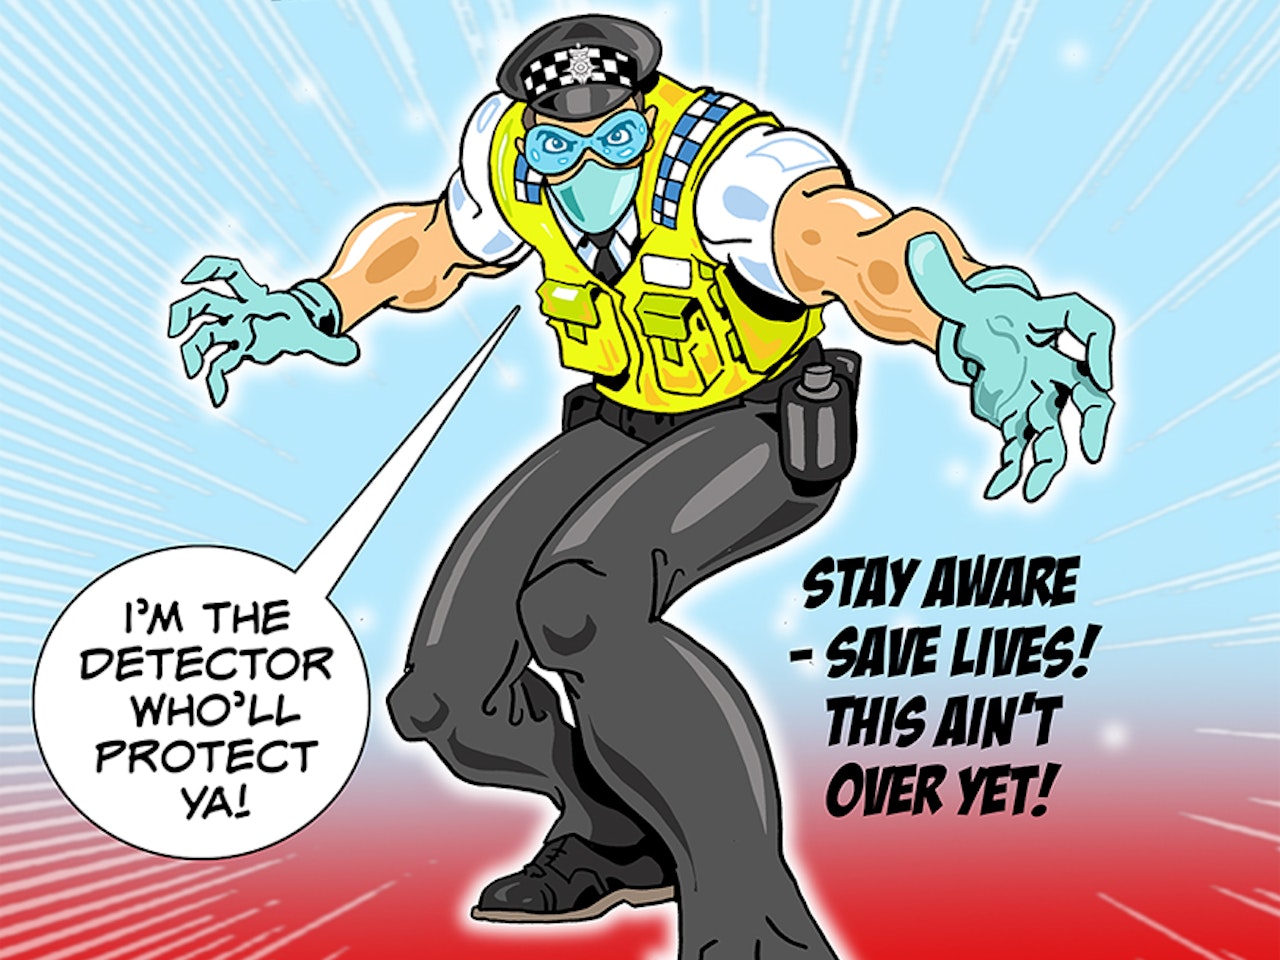 Cartoon character dynamic superhero frontline workers,emergency services,police,thinblueline, lawenforcement ,cops,policeofficer,backtheblue,cop,sheriff,firstresponders, policecar.